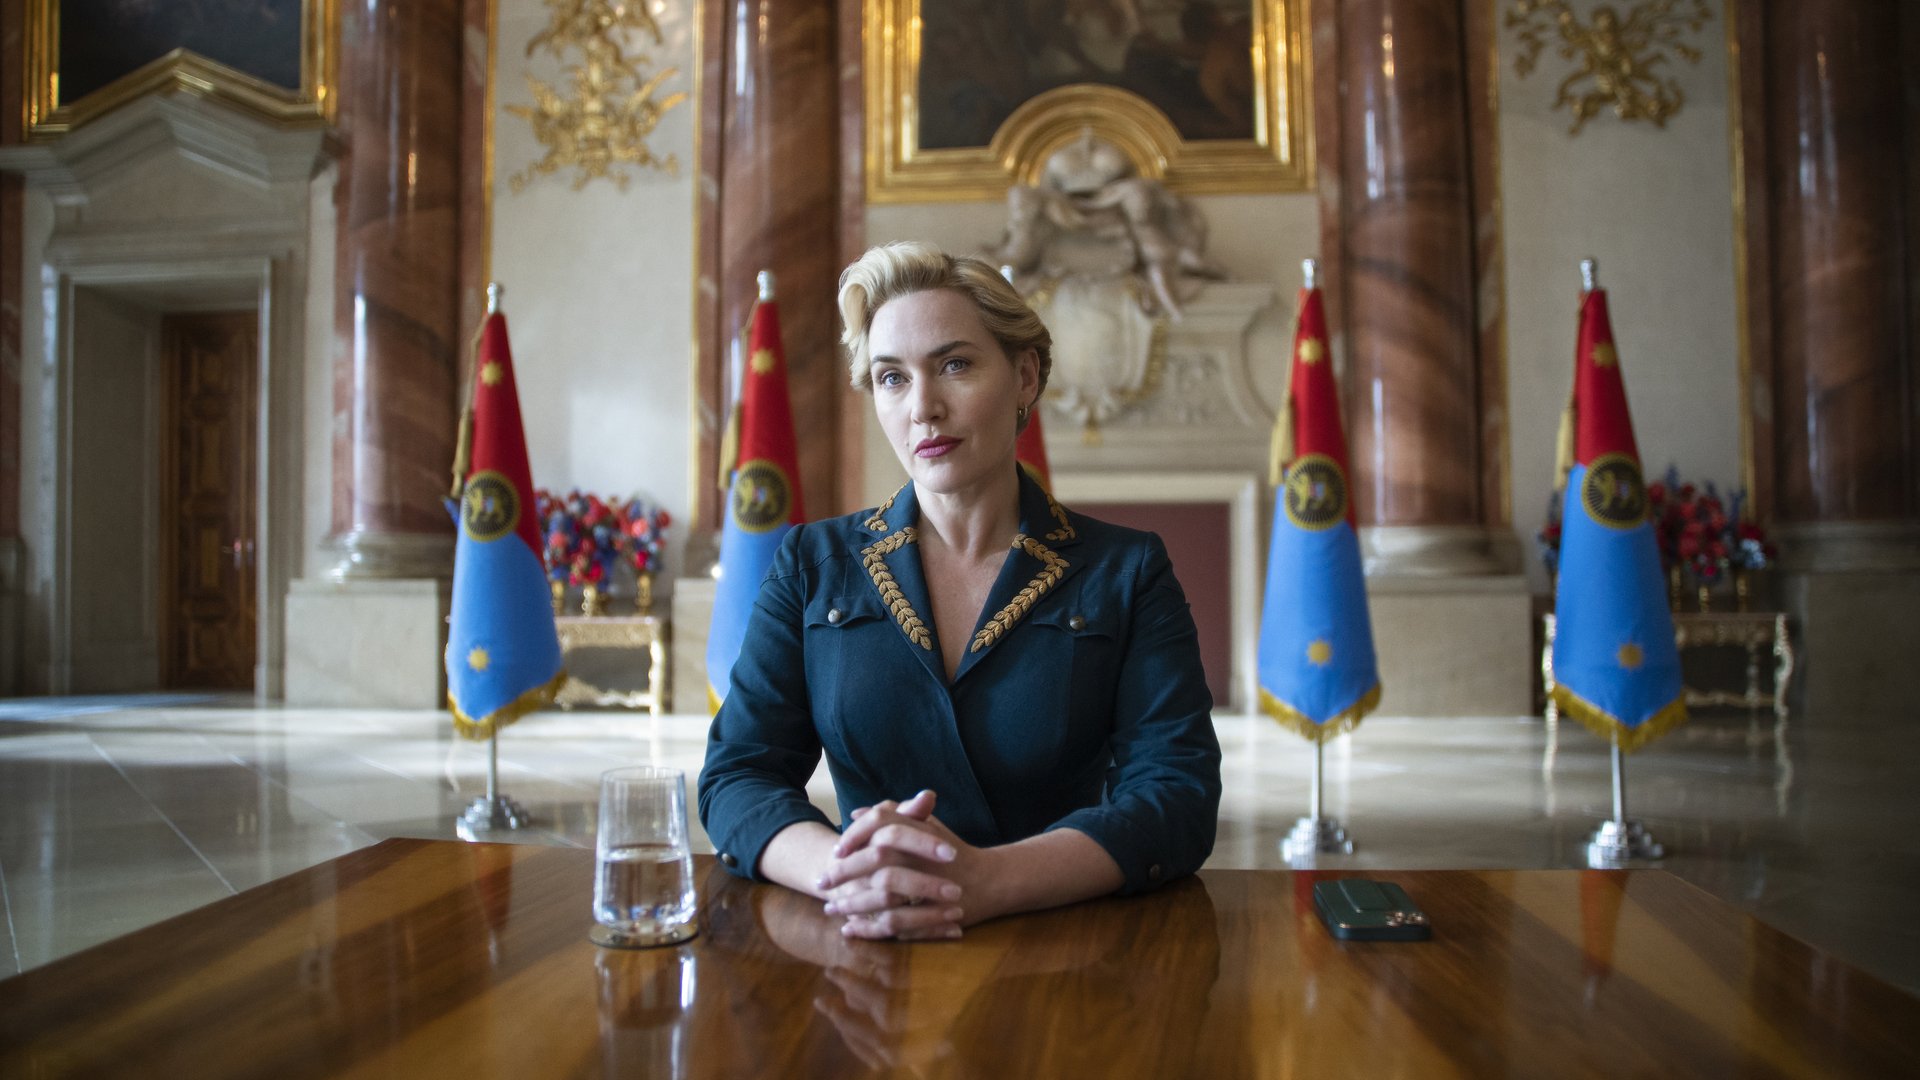 Kate Winslet sits at a desk dressed as a chancellor.